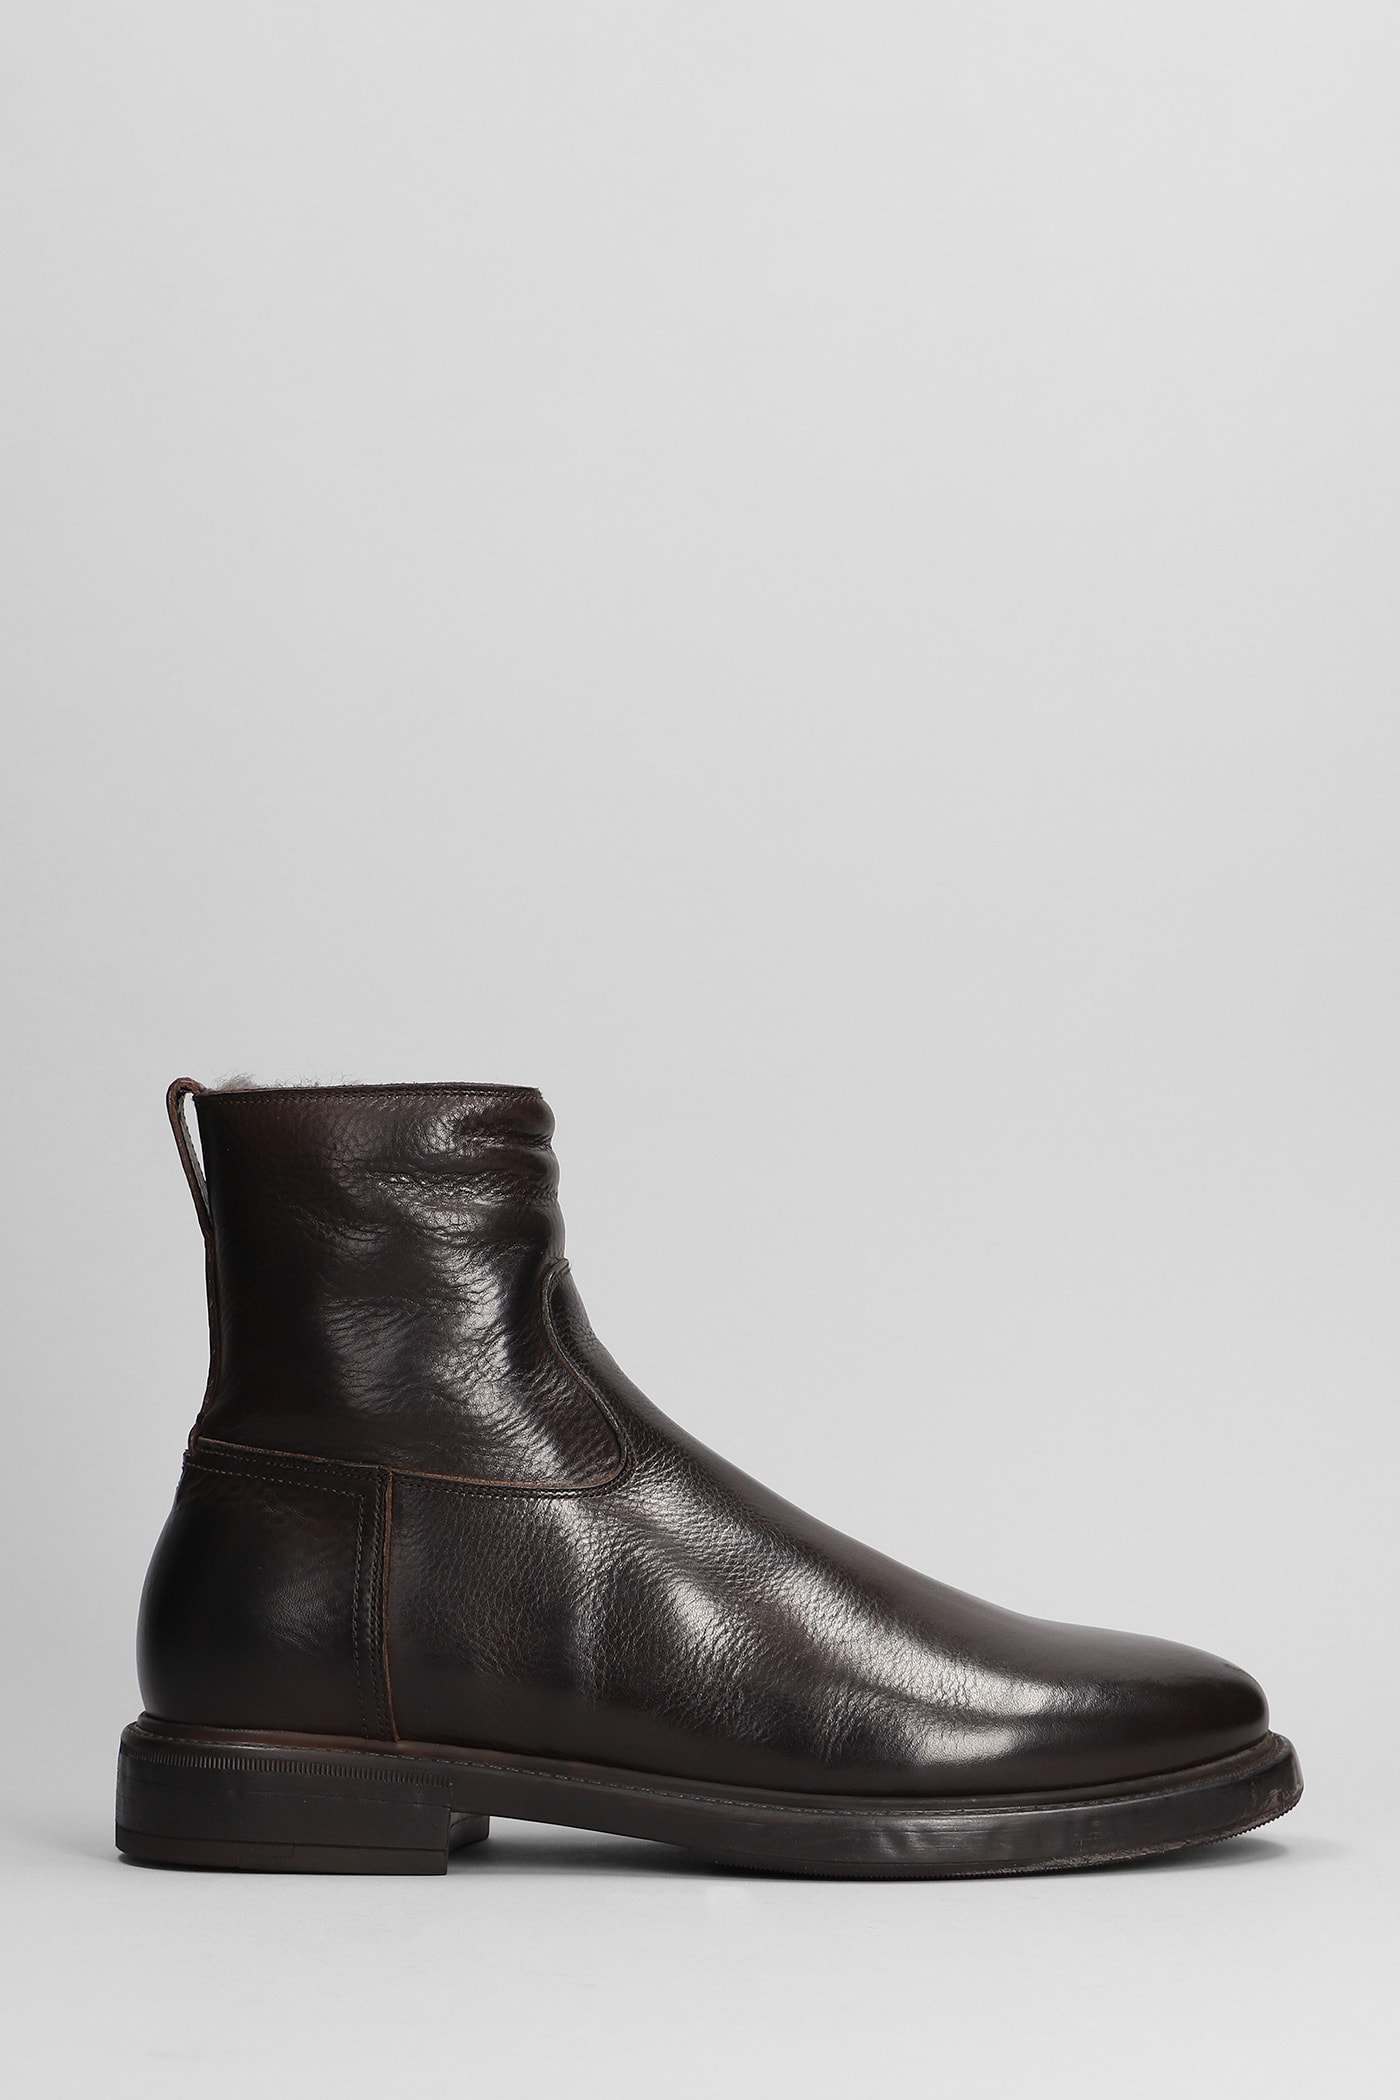 SILVANO SASSETTI LOW HEELS ANKLE BOOTS IN DARK BROWN LEATHER